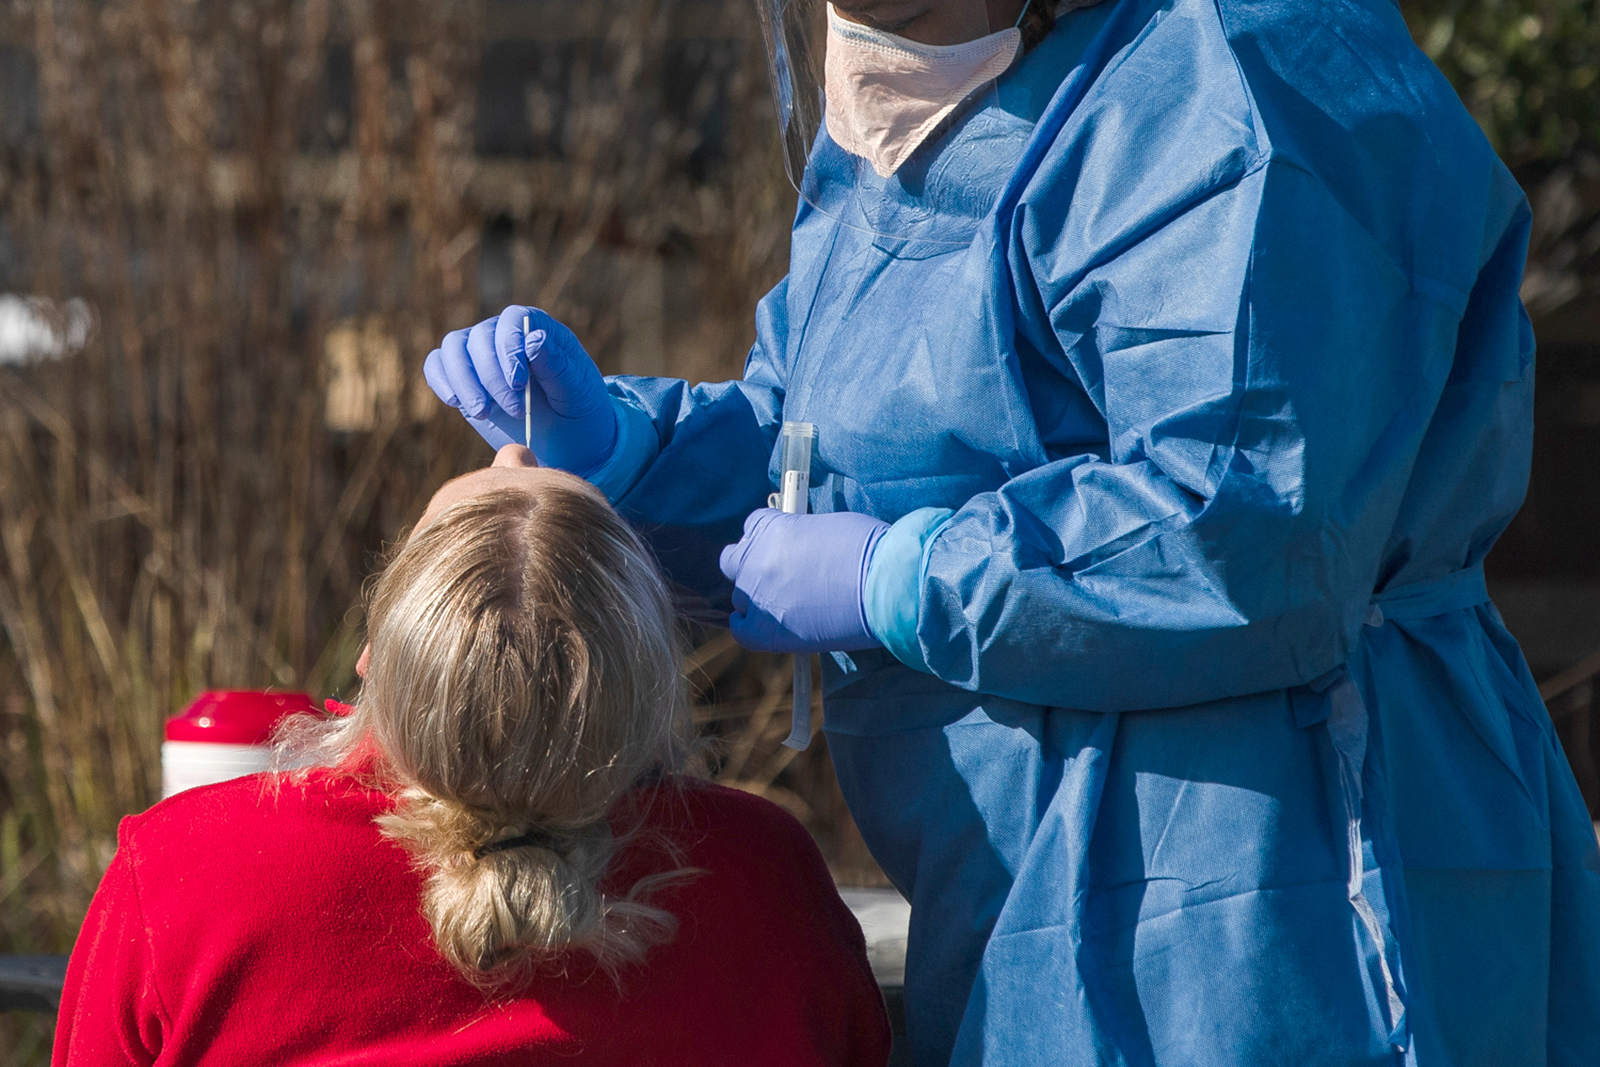 A healthcare worker administers a Covid-19 test at a site in Charleston, South Carolina, on January 13.